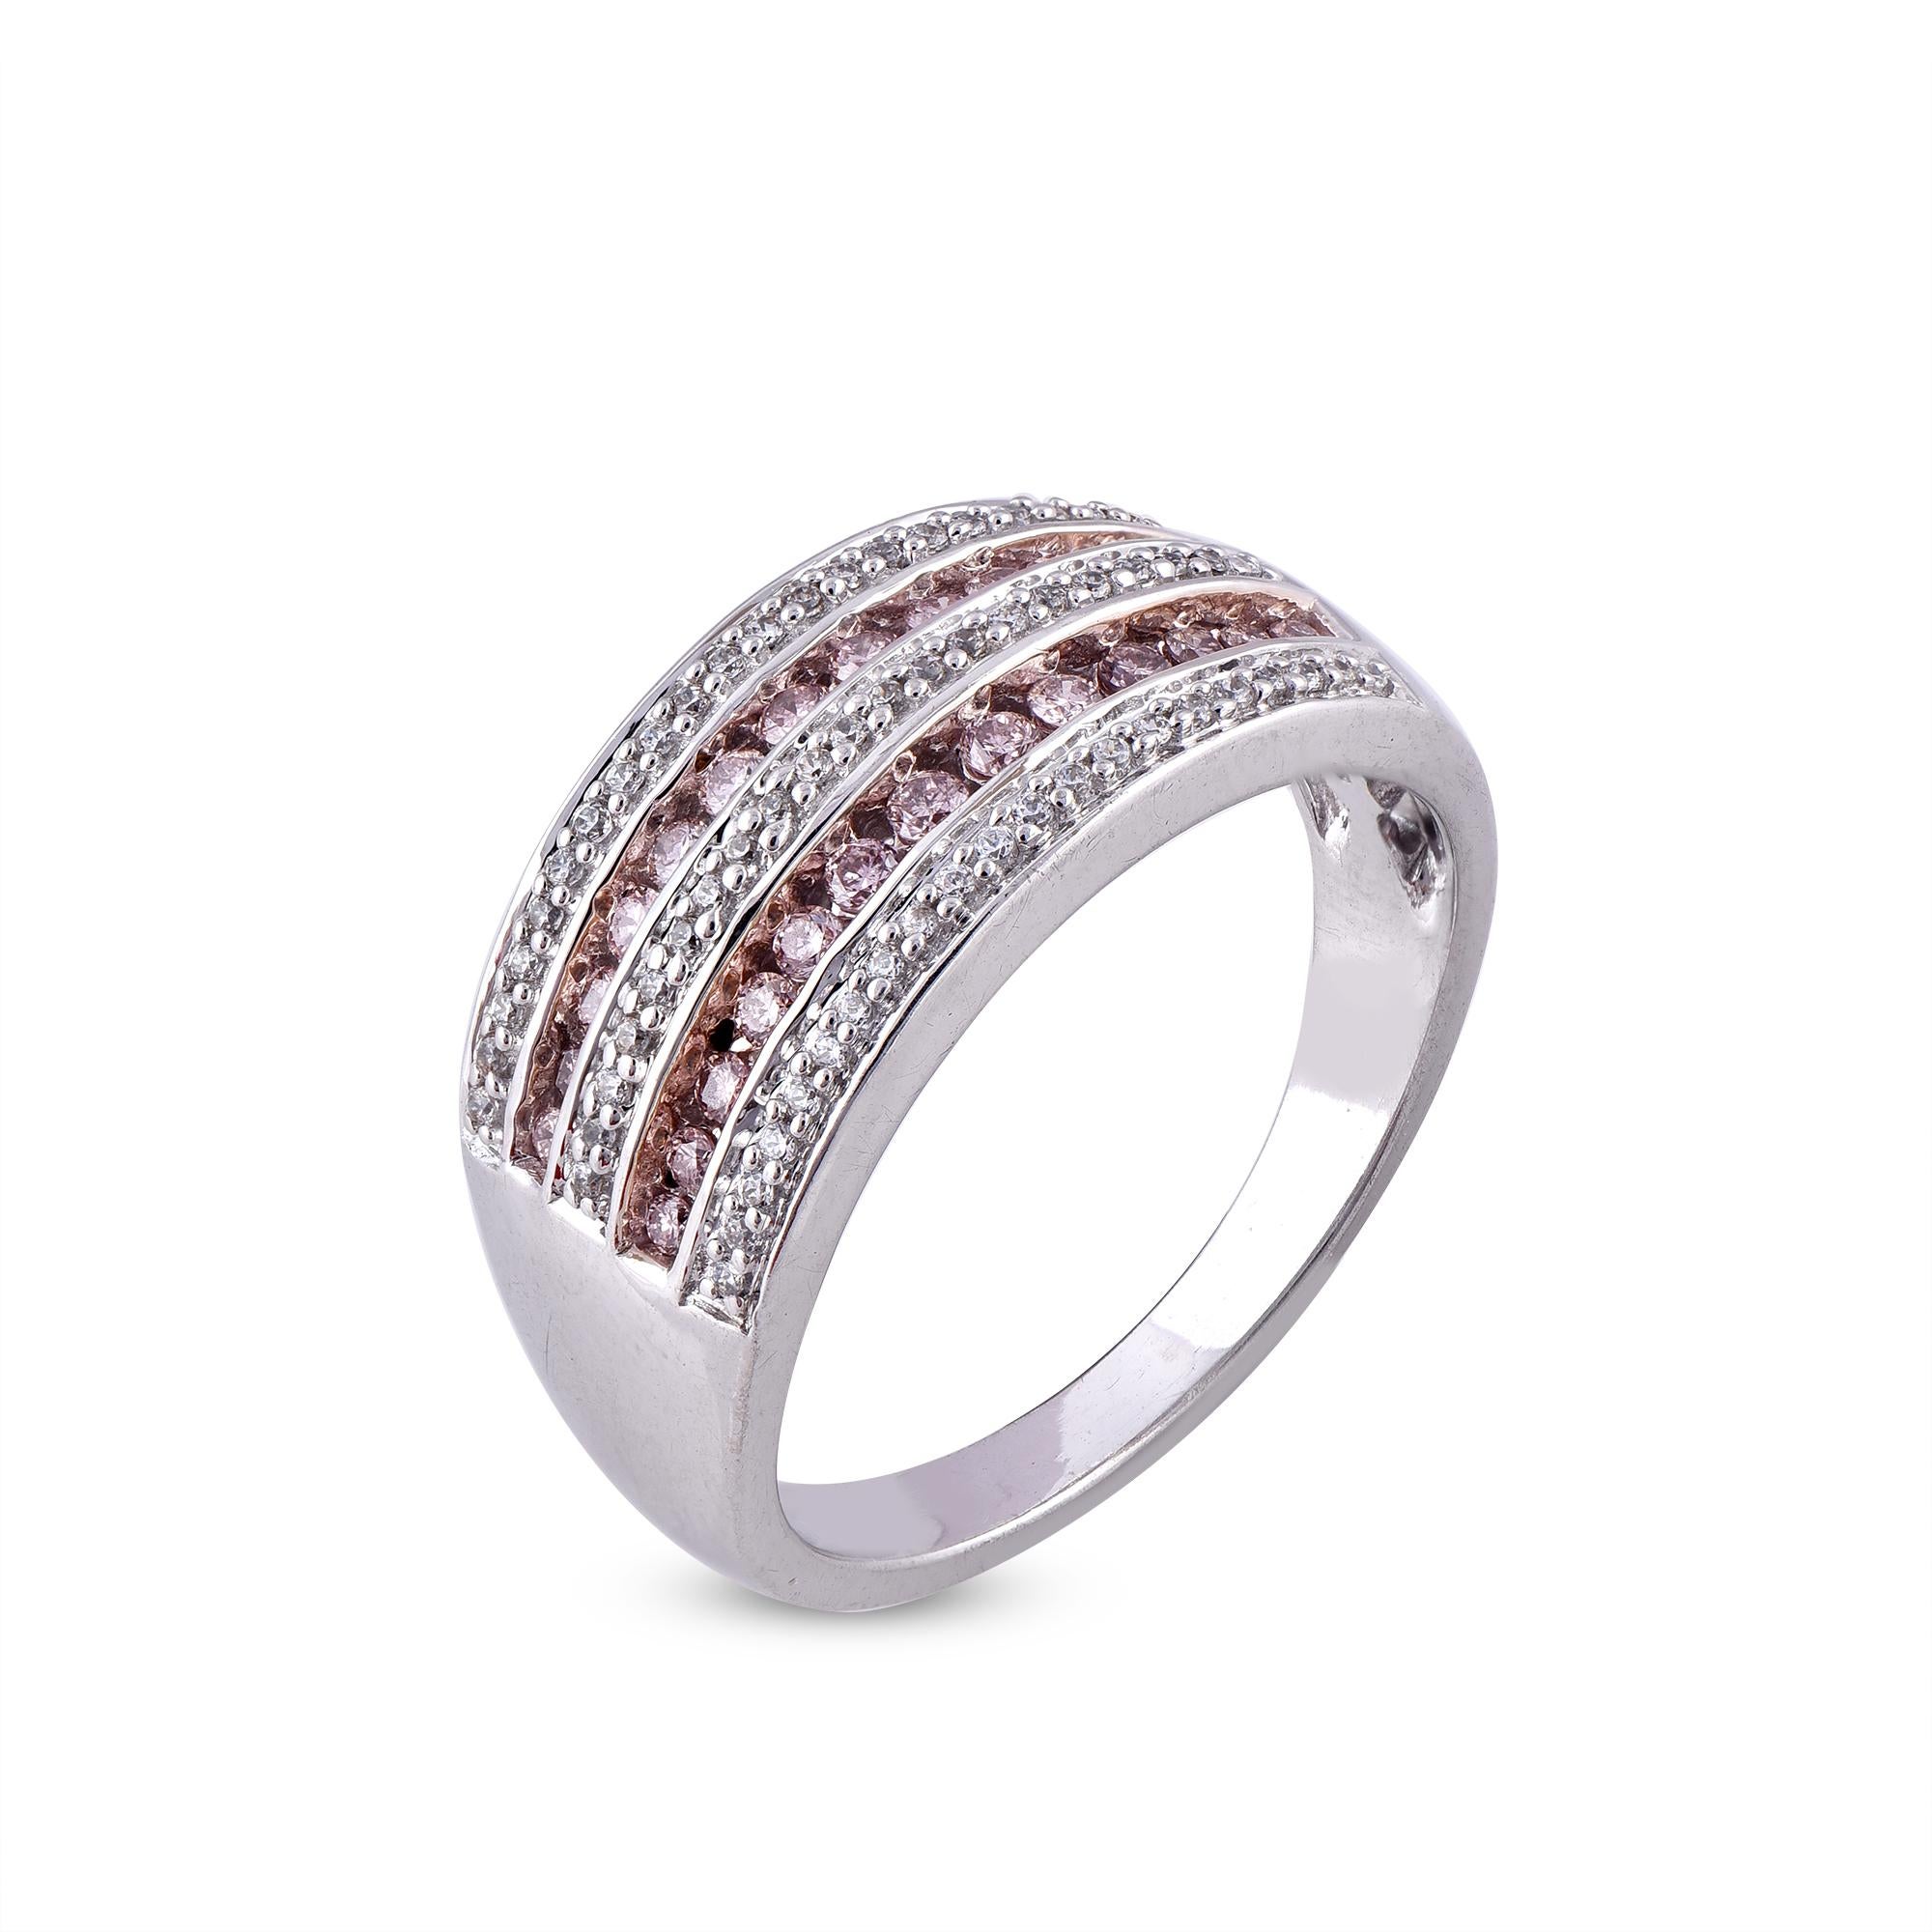 Make lifelong memory with this multi row diamond wedding band ring. The ring is crafted from 18 karat gold in your choice of white, rose, or yellow, and features 63 white and 26 pink diamonds, Prong set, H-I color I1 clarity and a high polish finish